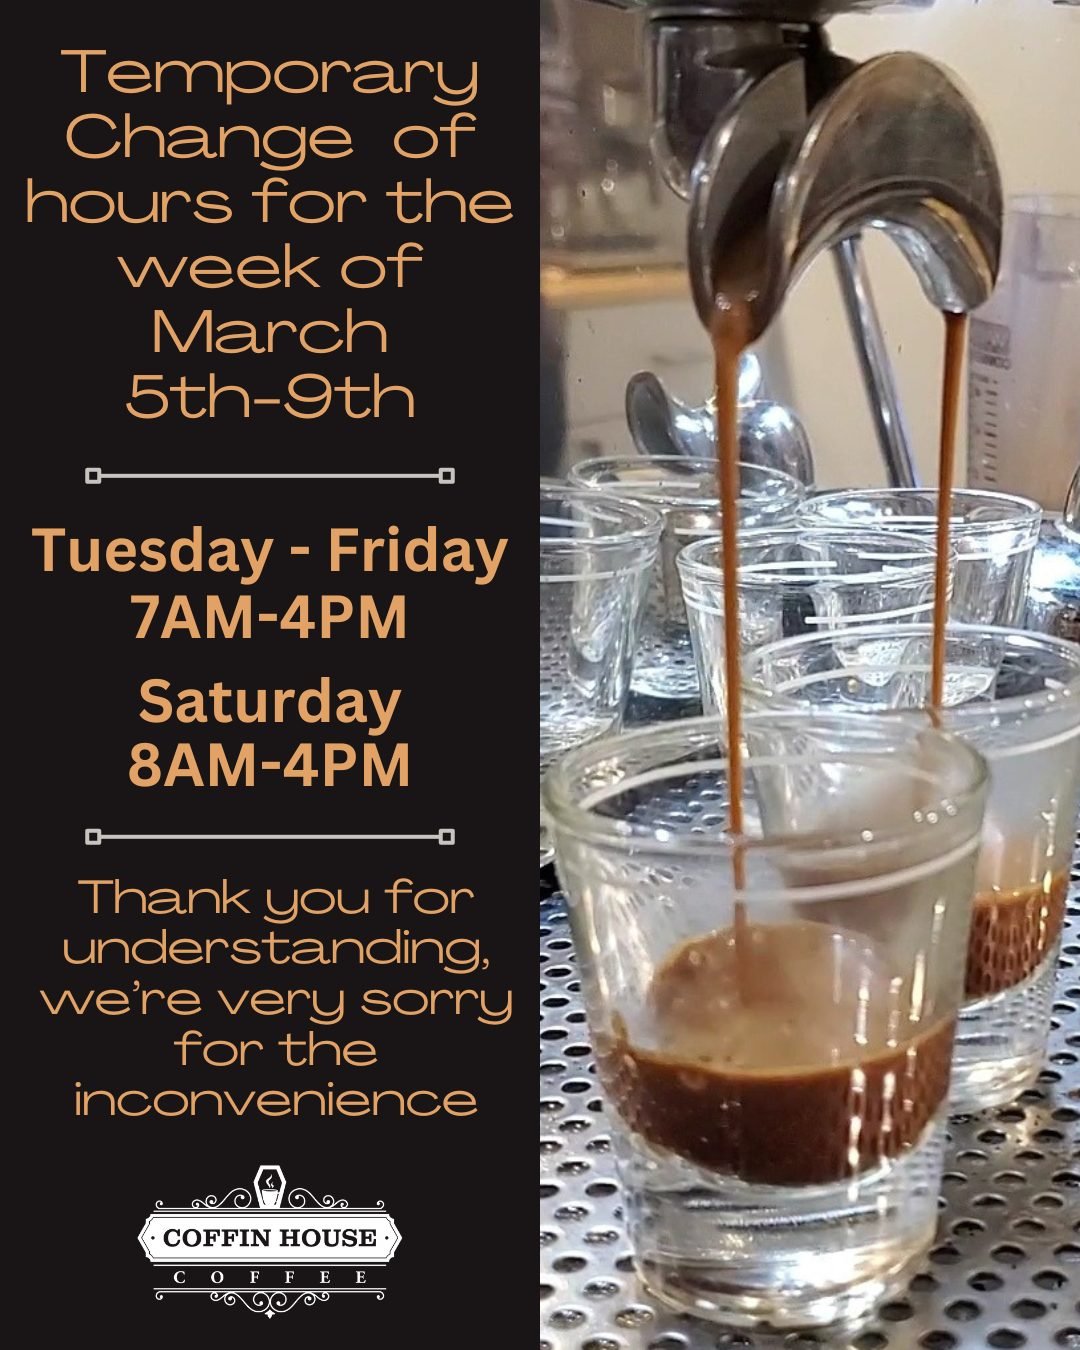 We will be having shorter business hours this week: 7AM-4PM Tuesday thru Friday &amp; 8AM-4PM on Saturday. Sorry for the inconvenience, we thank you for understanding.
❤☕
Don't forget to swing by for Spring Break &amp; grab one of our LUCK of the LAT